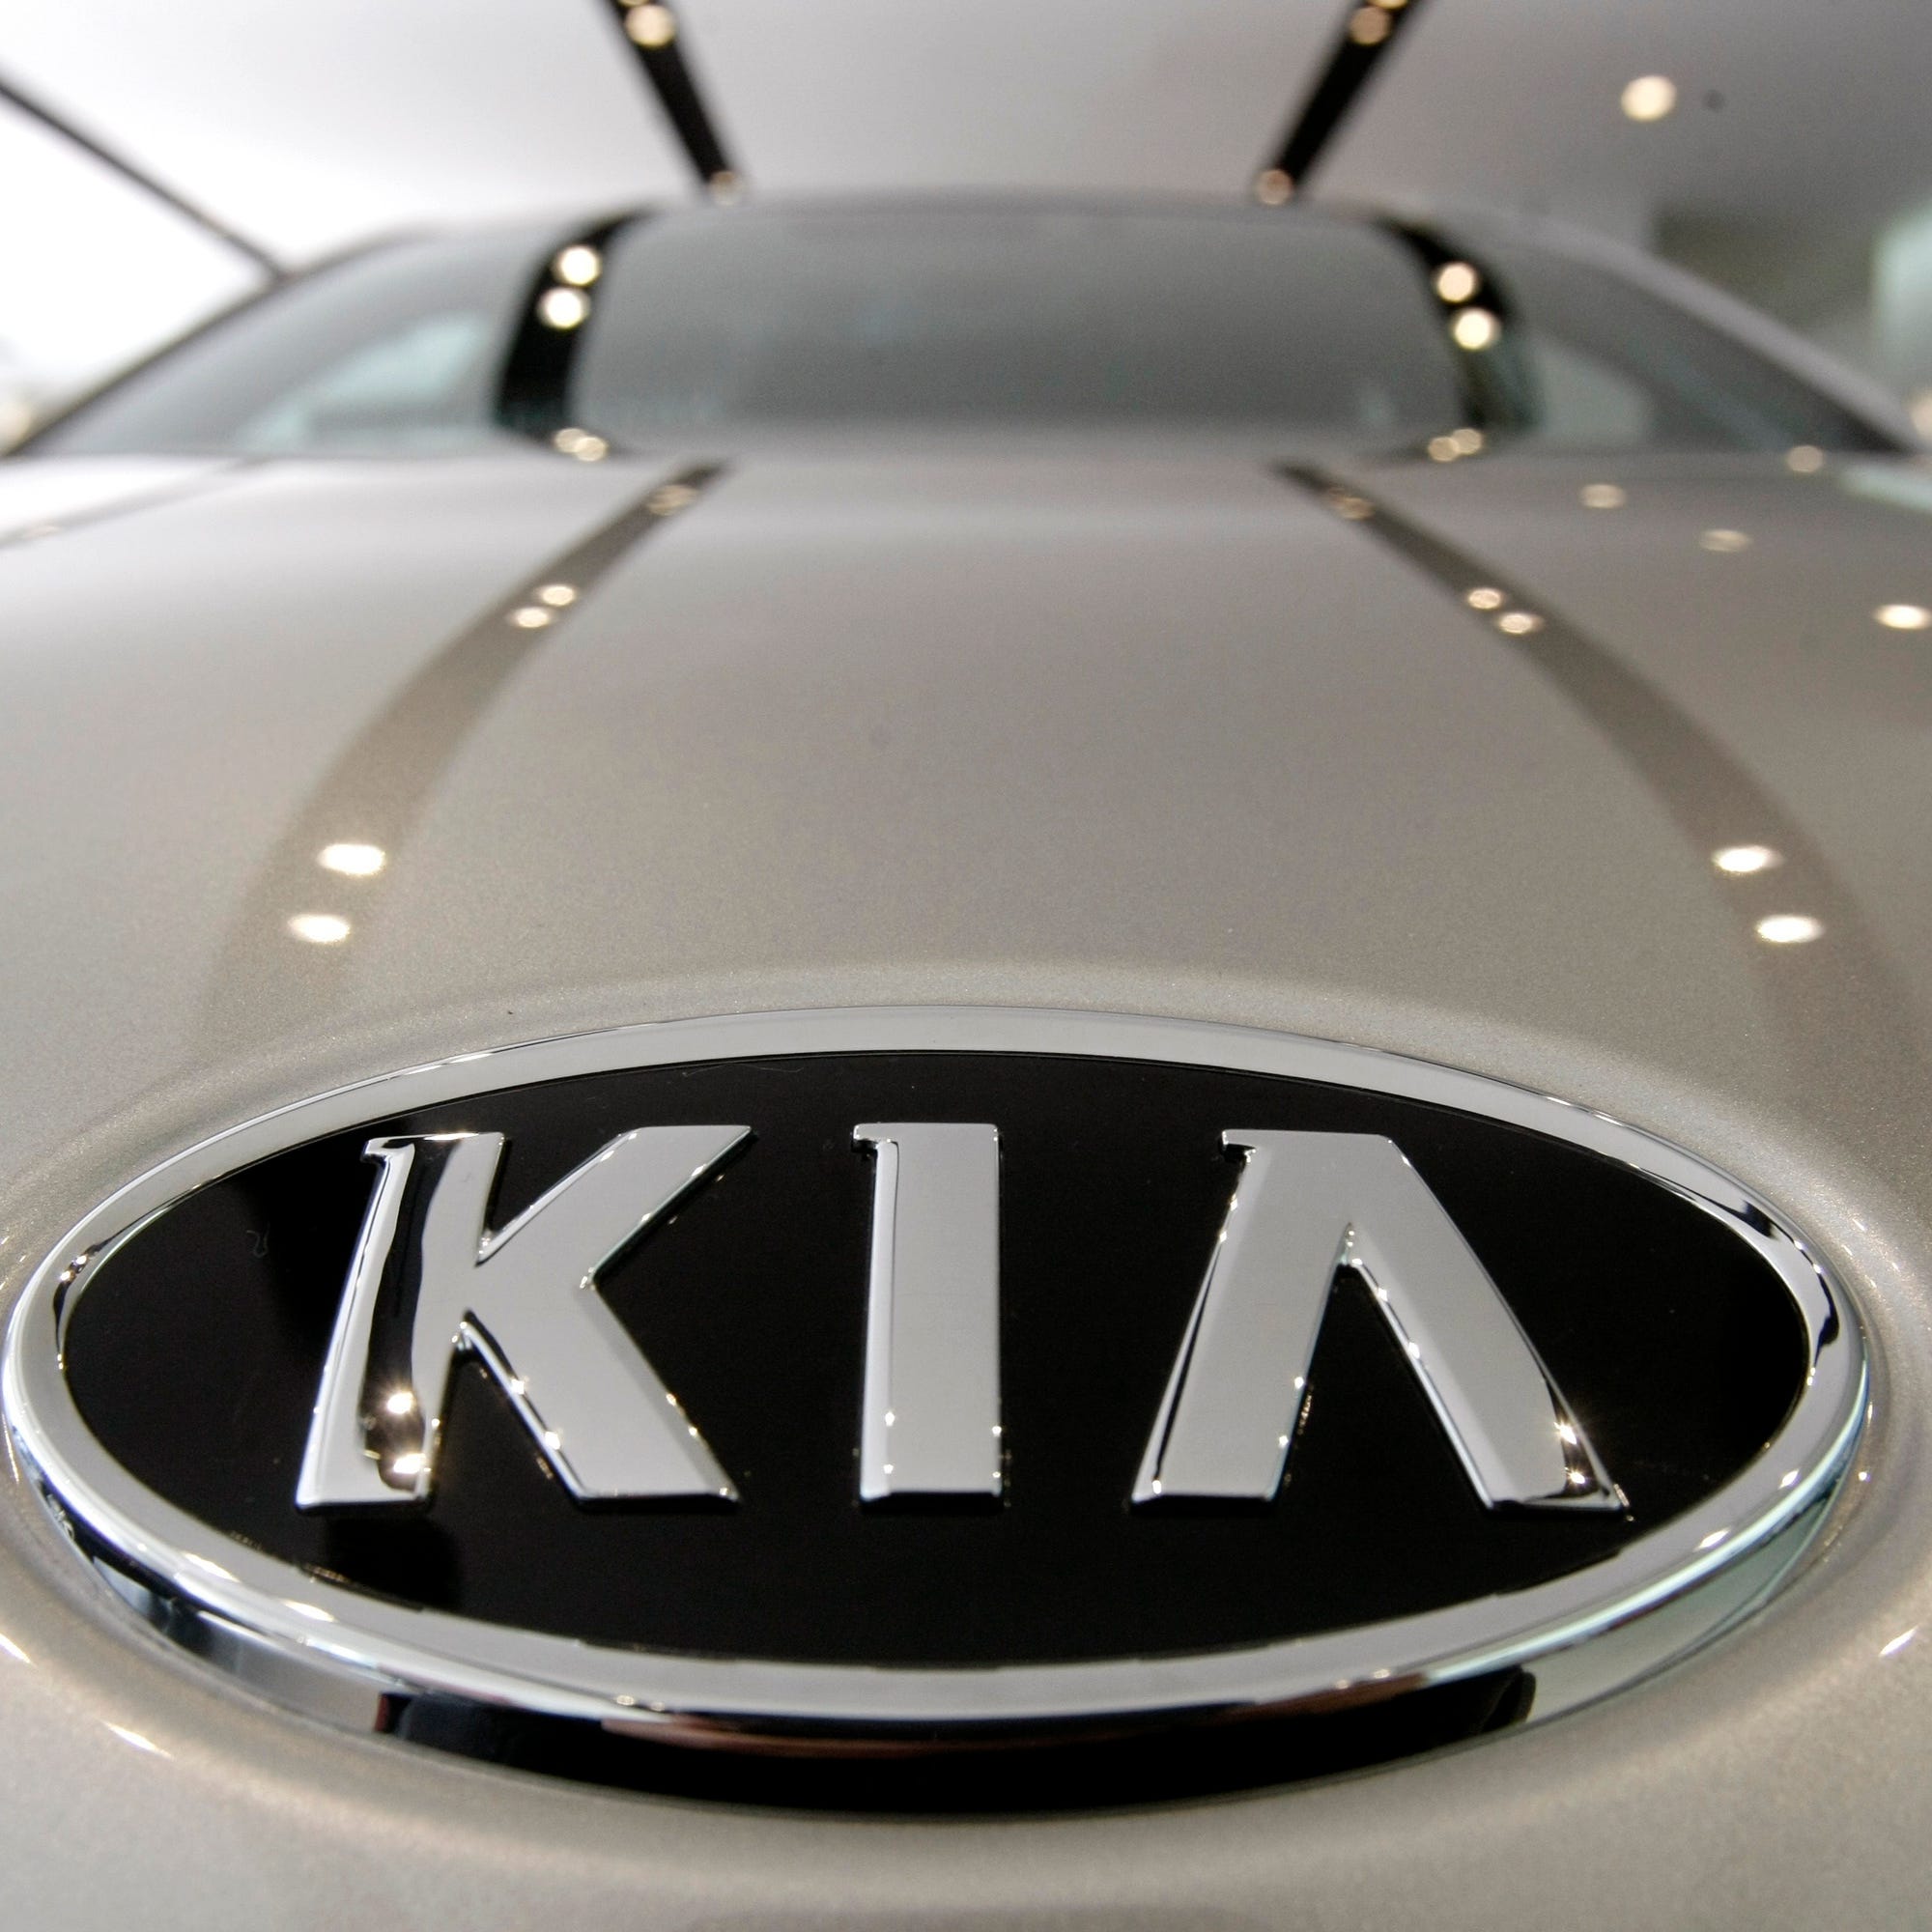 KIA Motors logo is seen on a K7 sedan at a showroom in Seoul, South Korea.  Kia is recalling over a half-million vehicles in the U.S. because the air bags may not work in a crash. The recall apparently is related to federal investigation into air bag failures in Kia and partner Hyundai vehicles that were linked to four deaths. Vehicles covered by the recall include 2010 through 2013 Forte compact cars and 2011 through 2013 Optima midsize cars. Also covered are Optima Hybrid and   Sedona minivans from 2011 and 2012.